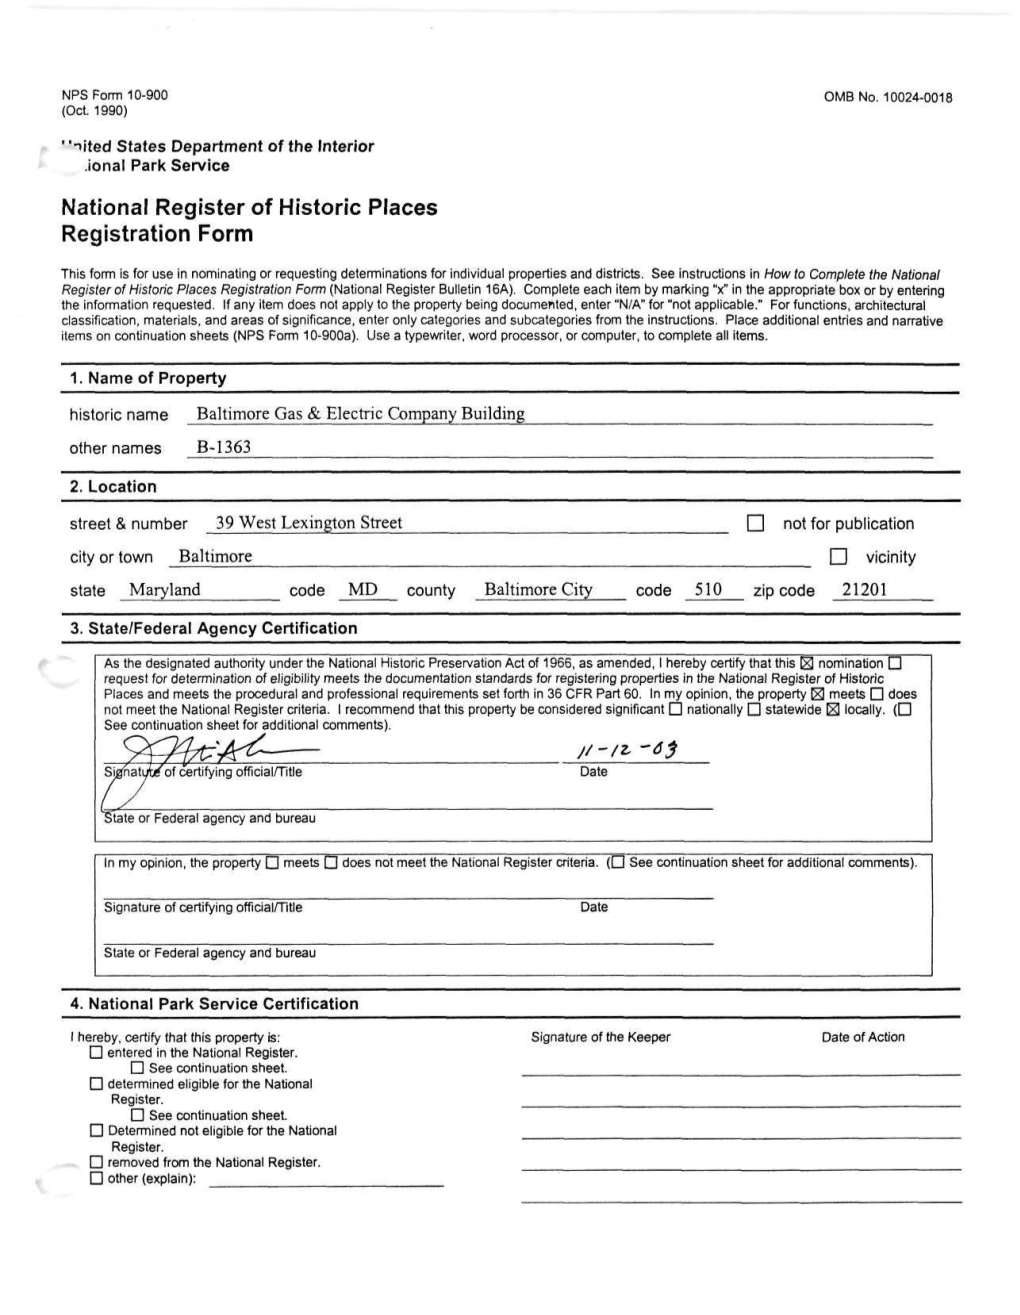 National Register of Historic Places Continuation Sheet Baltimore Gas & Electric Co